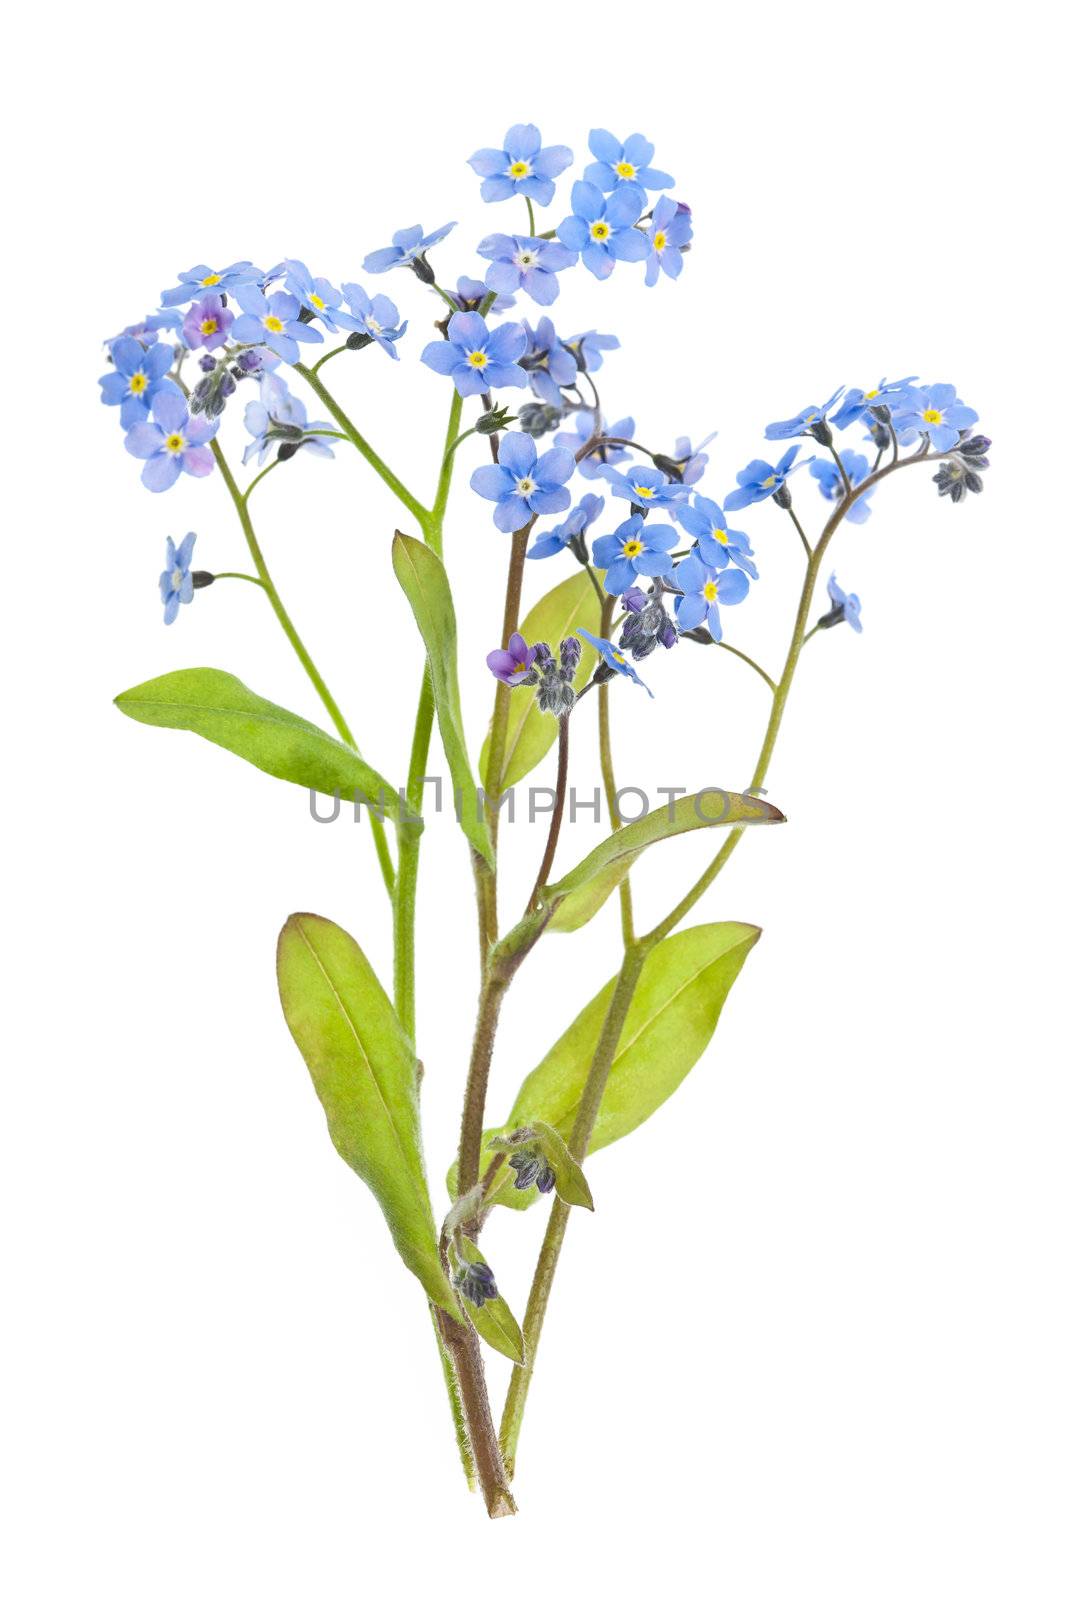 Forget-me-not flowers on white by elenathewise